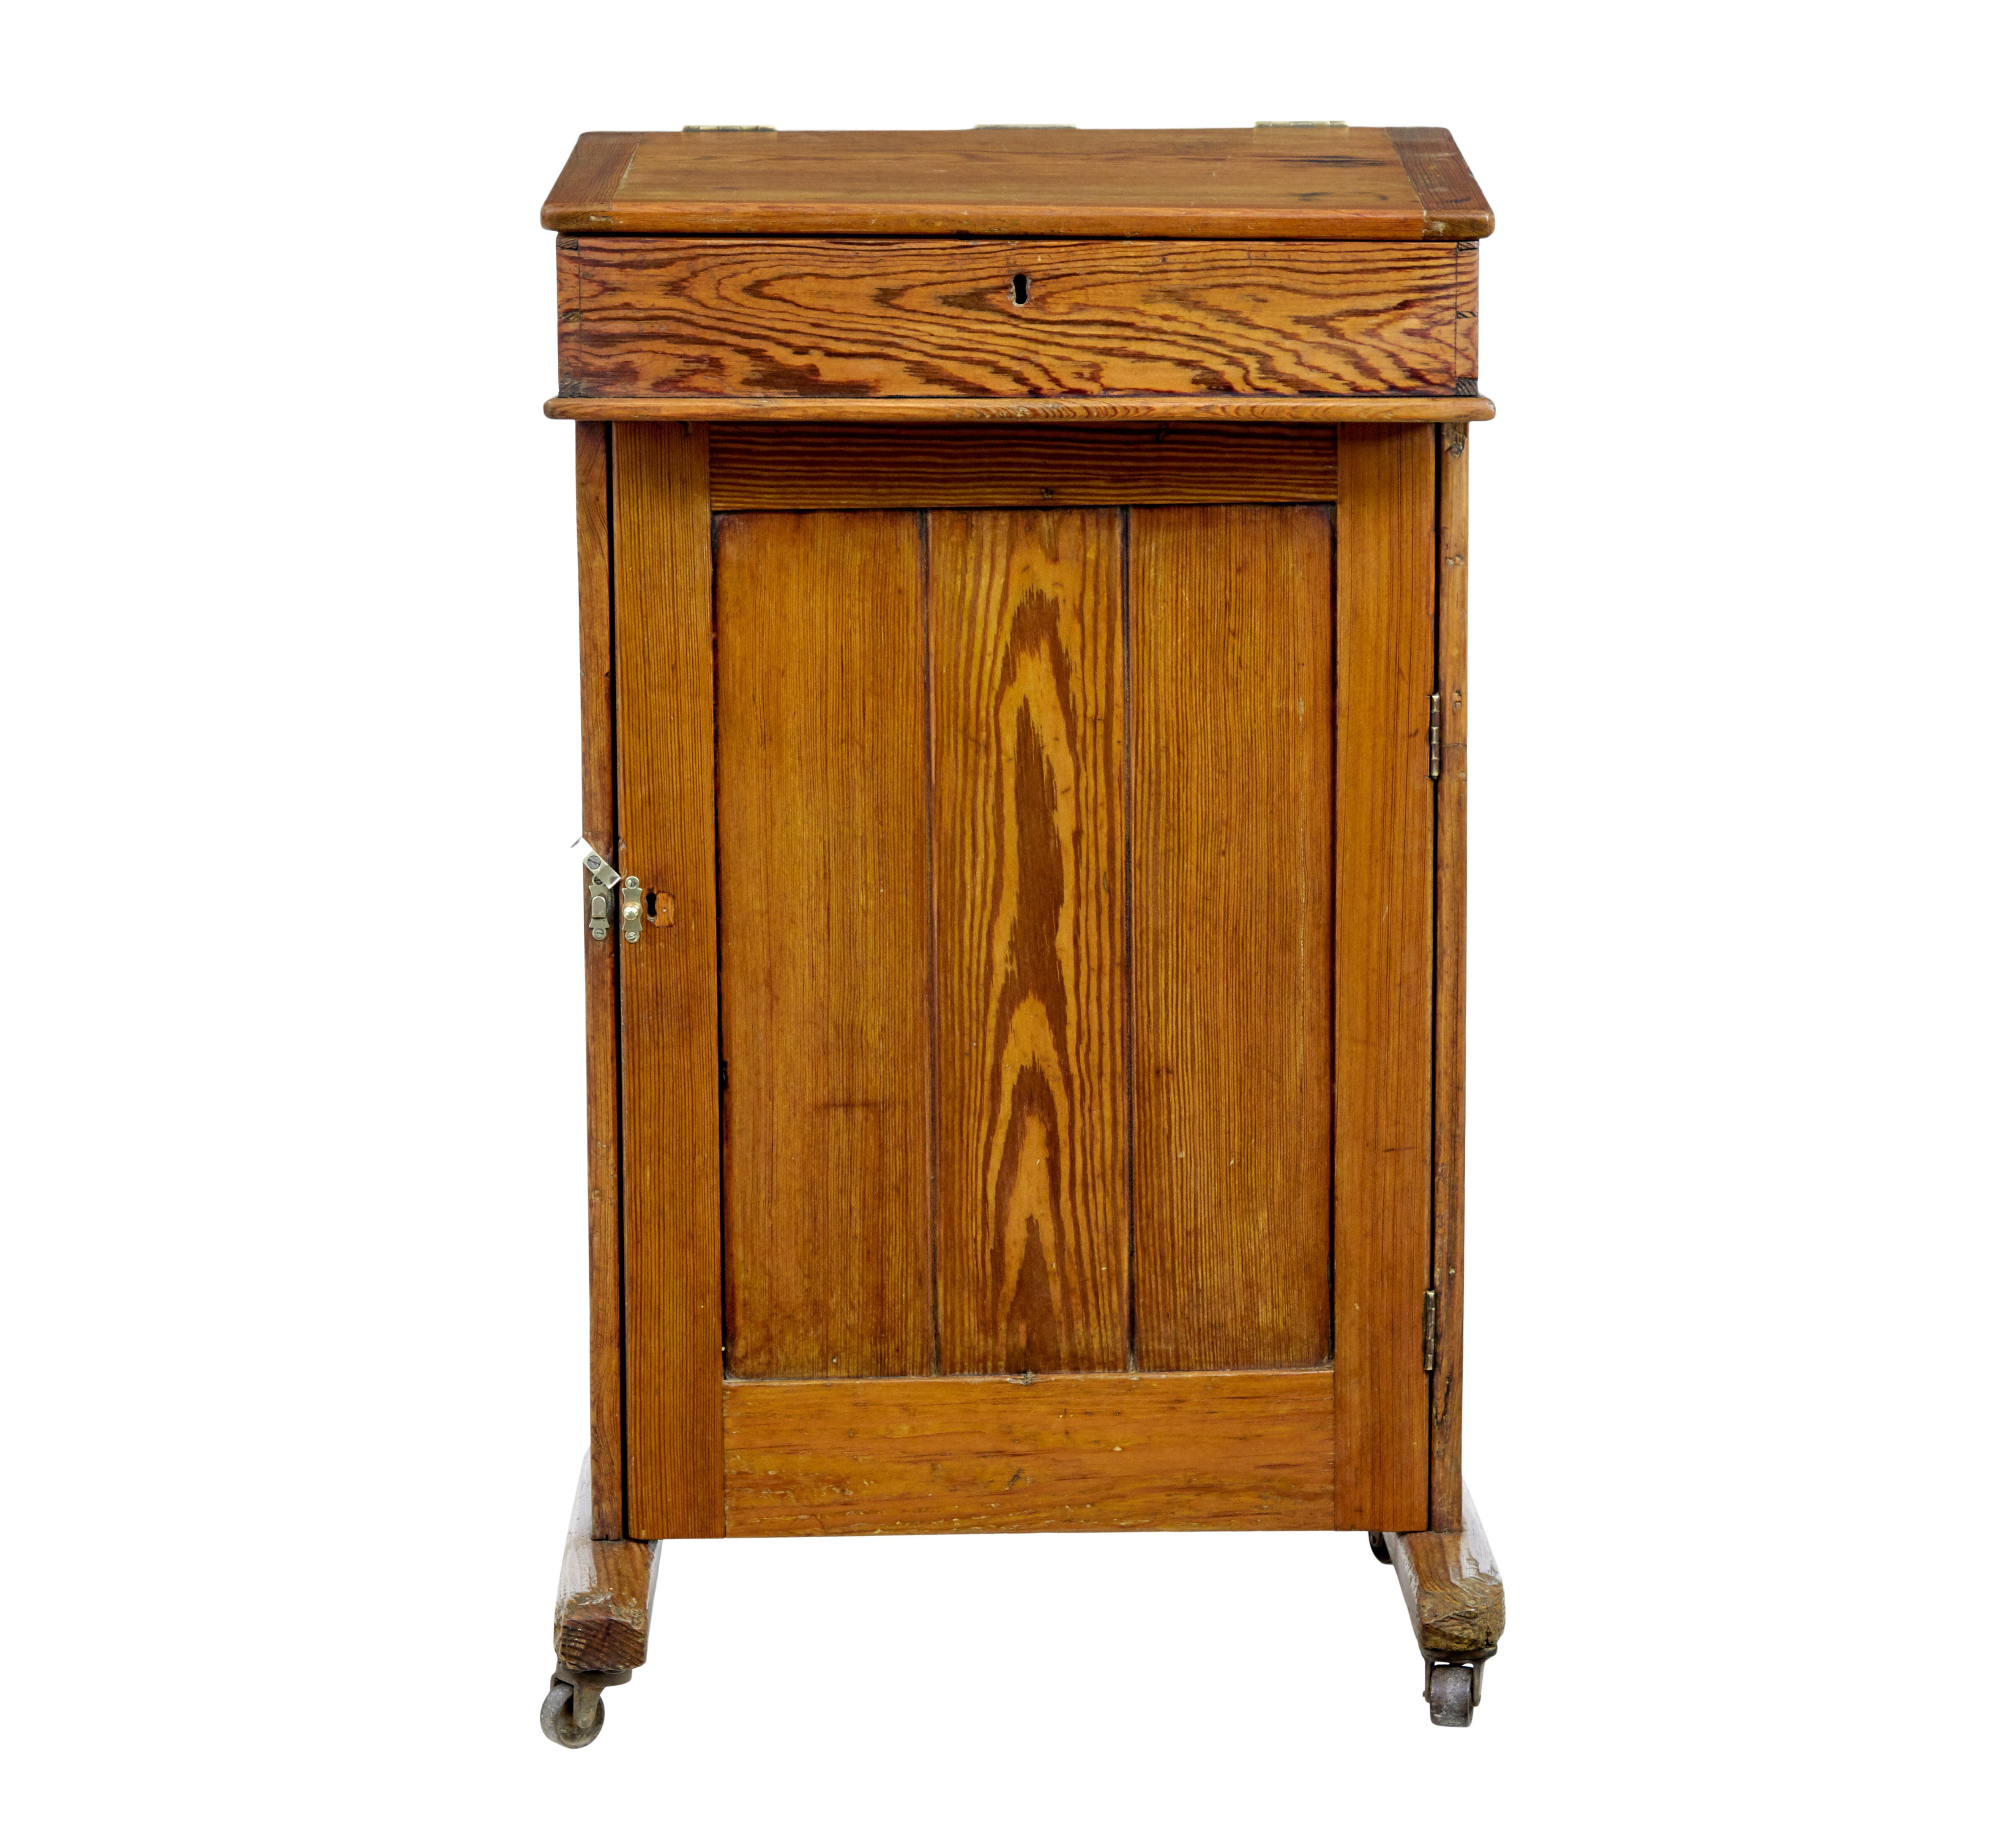 19th century tall pine lecture writing desk circa 1870.

Unusual standing desk which would have possibly been used for giving lectures or for concierge administration.

Made from pine, with a school writing slope flip lid, with a well underneath for